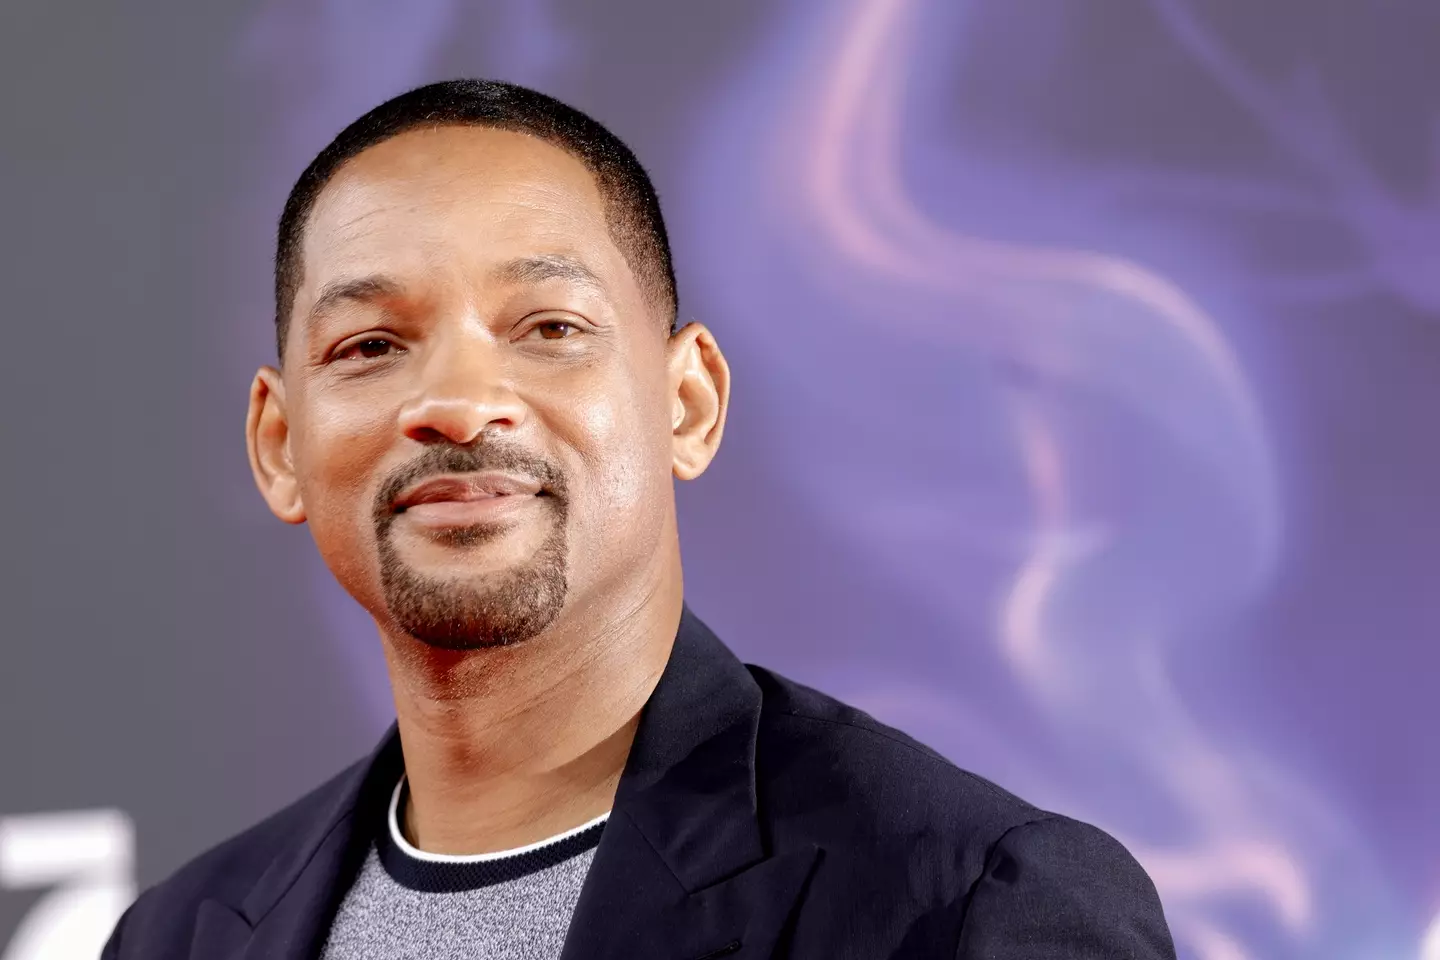 Many people had no idea that Will Smith's first name is Willard.